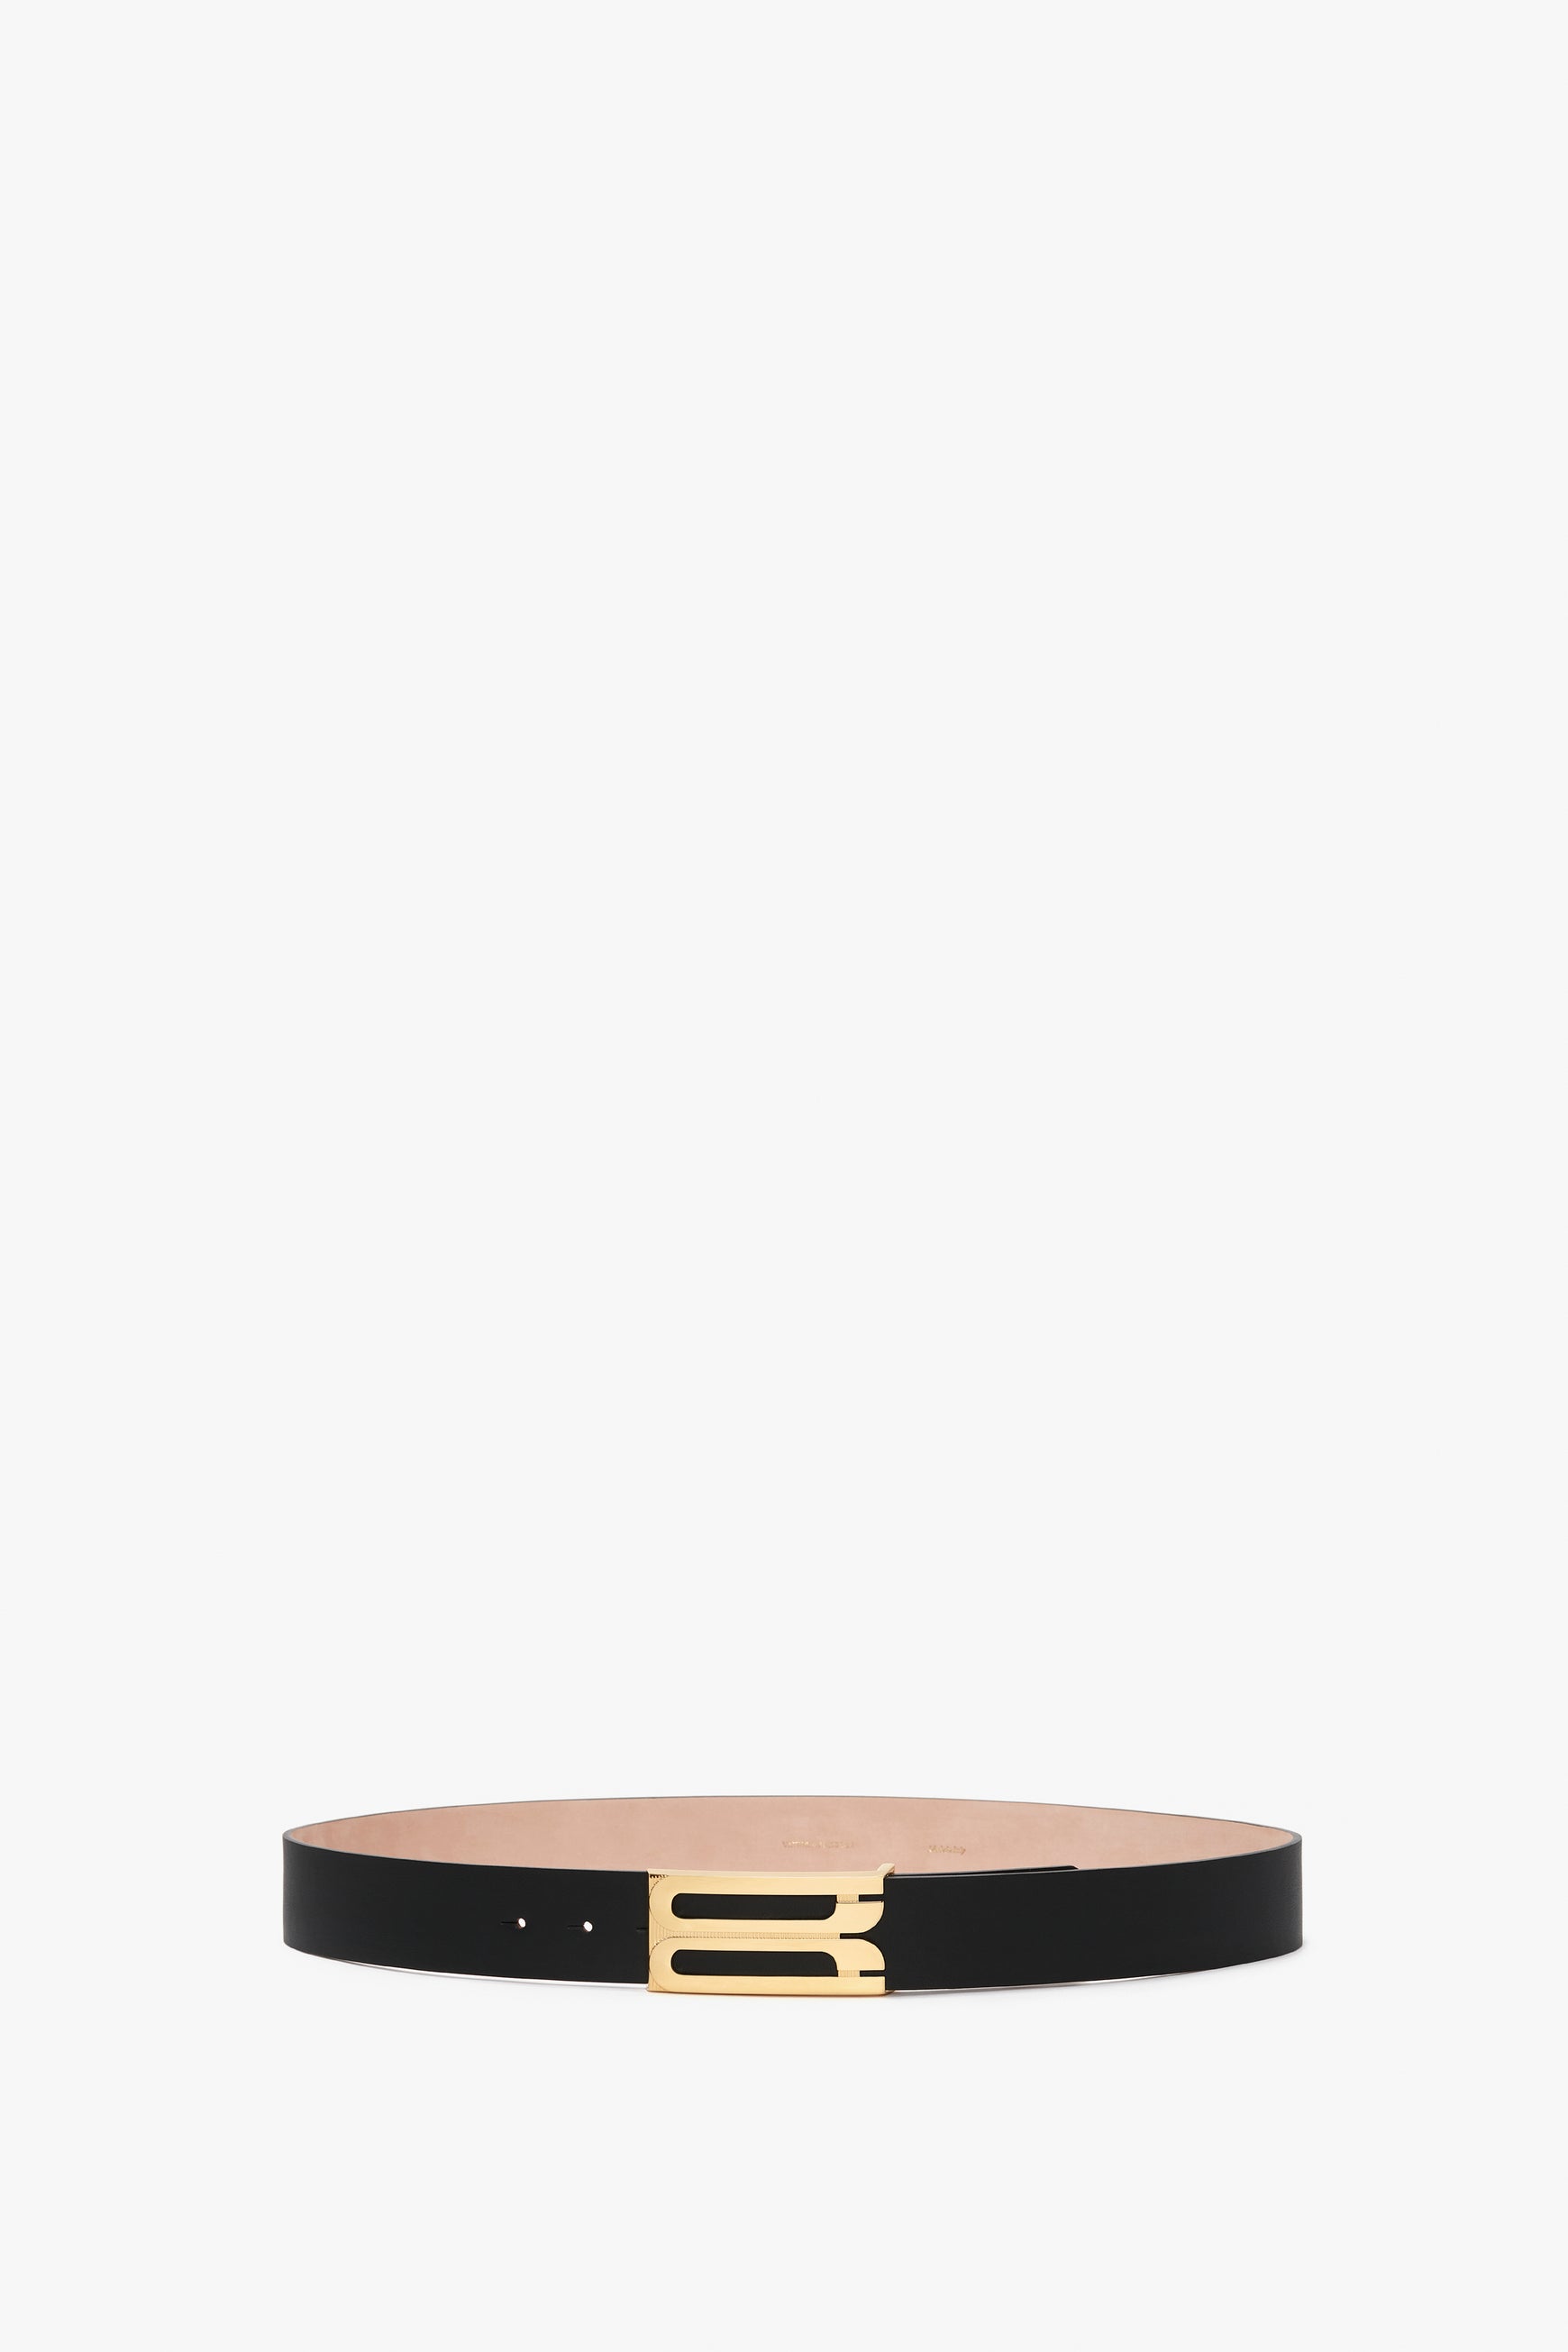 Exclusive Jumbo Frame Belt In Navy Leather by Victoria Beckham featuring smooth calf leather and a gold rectangular buckle, showcased against a white background.